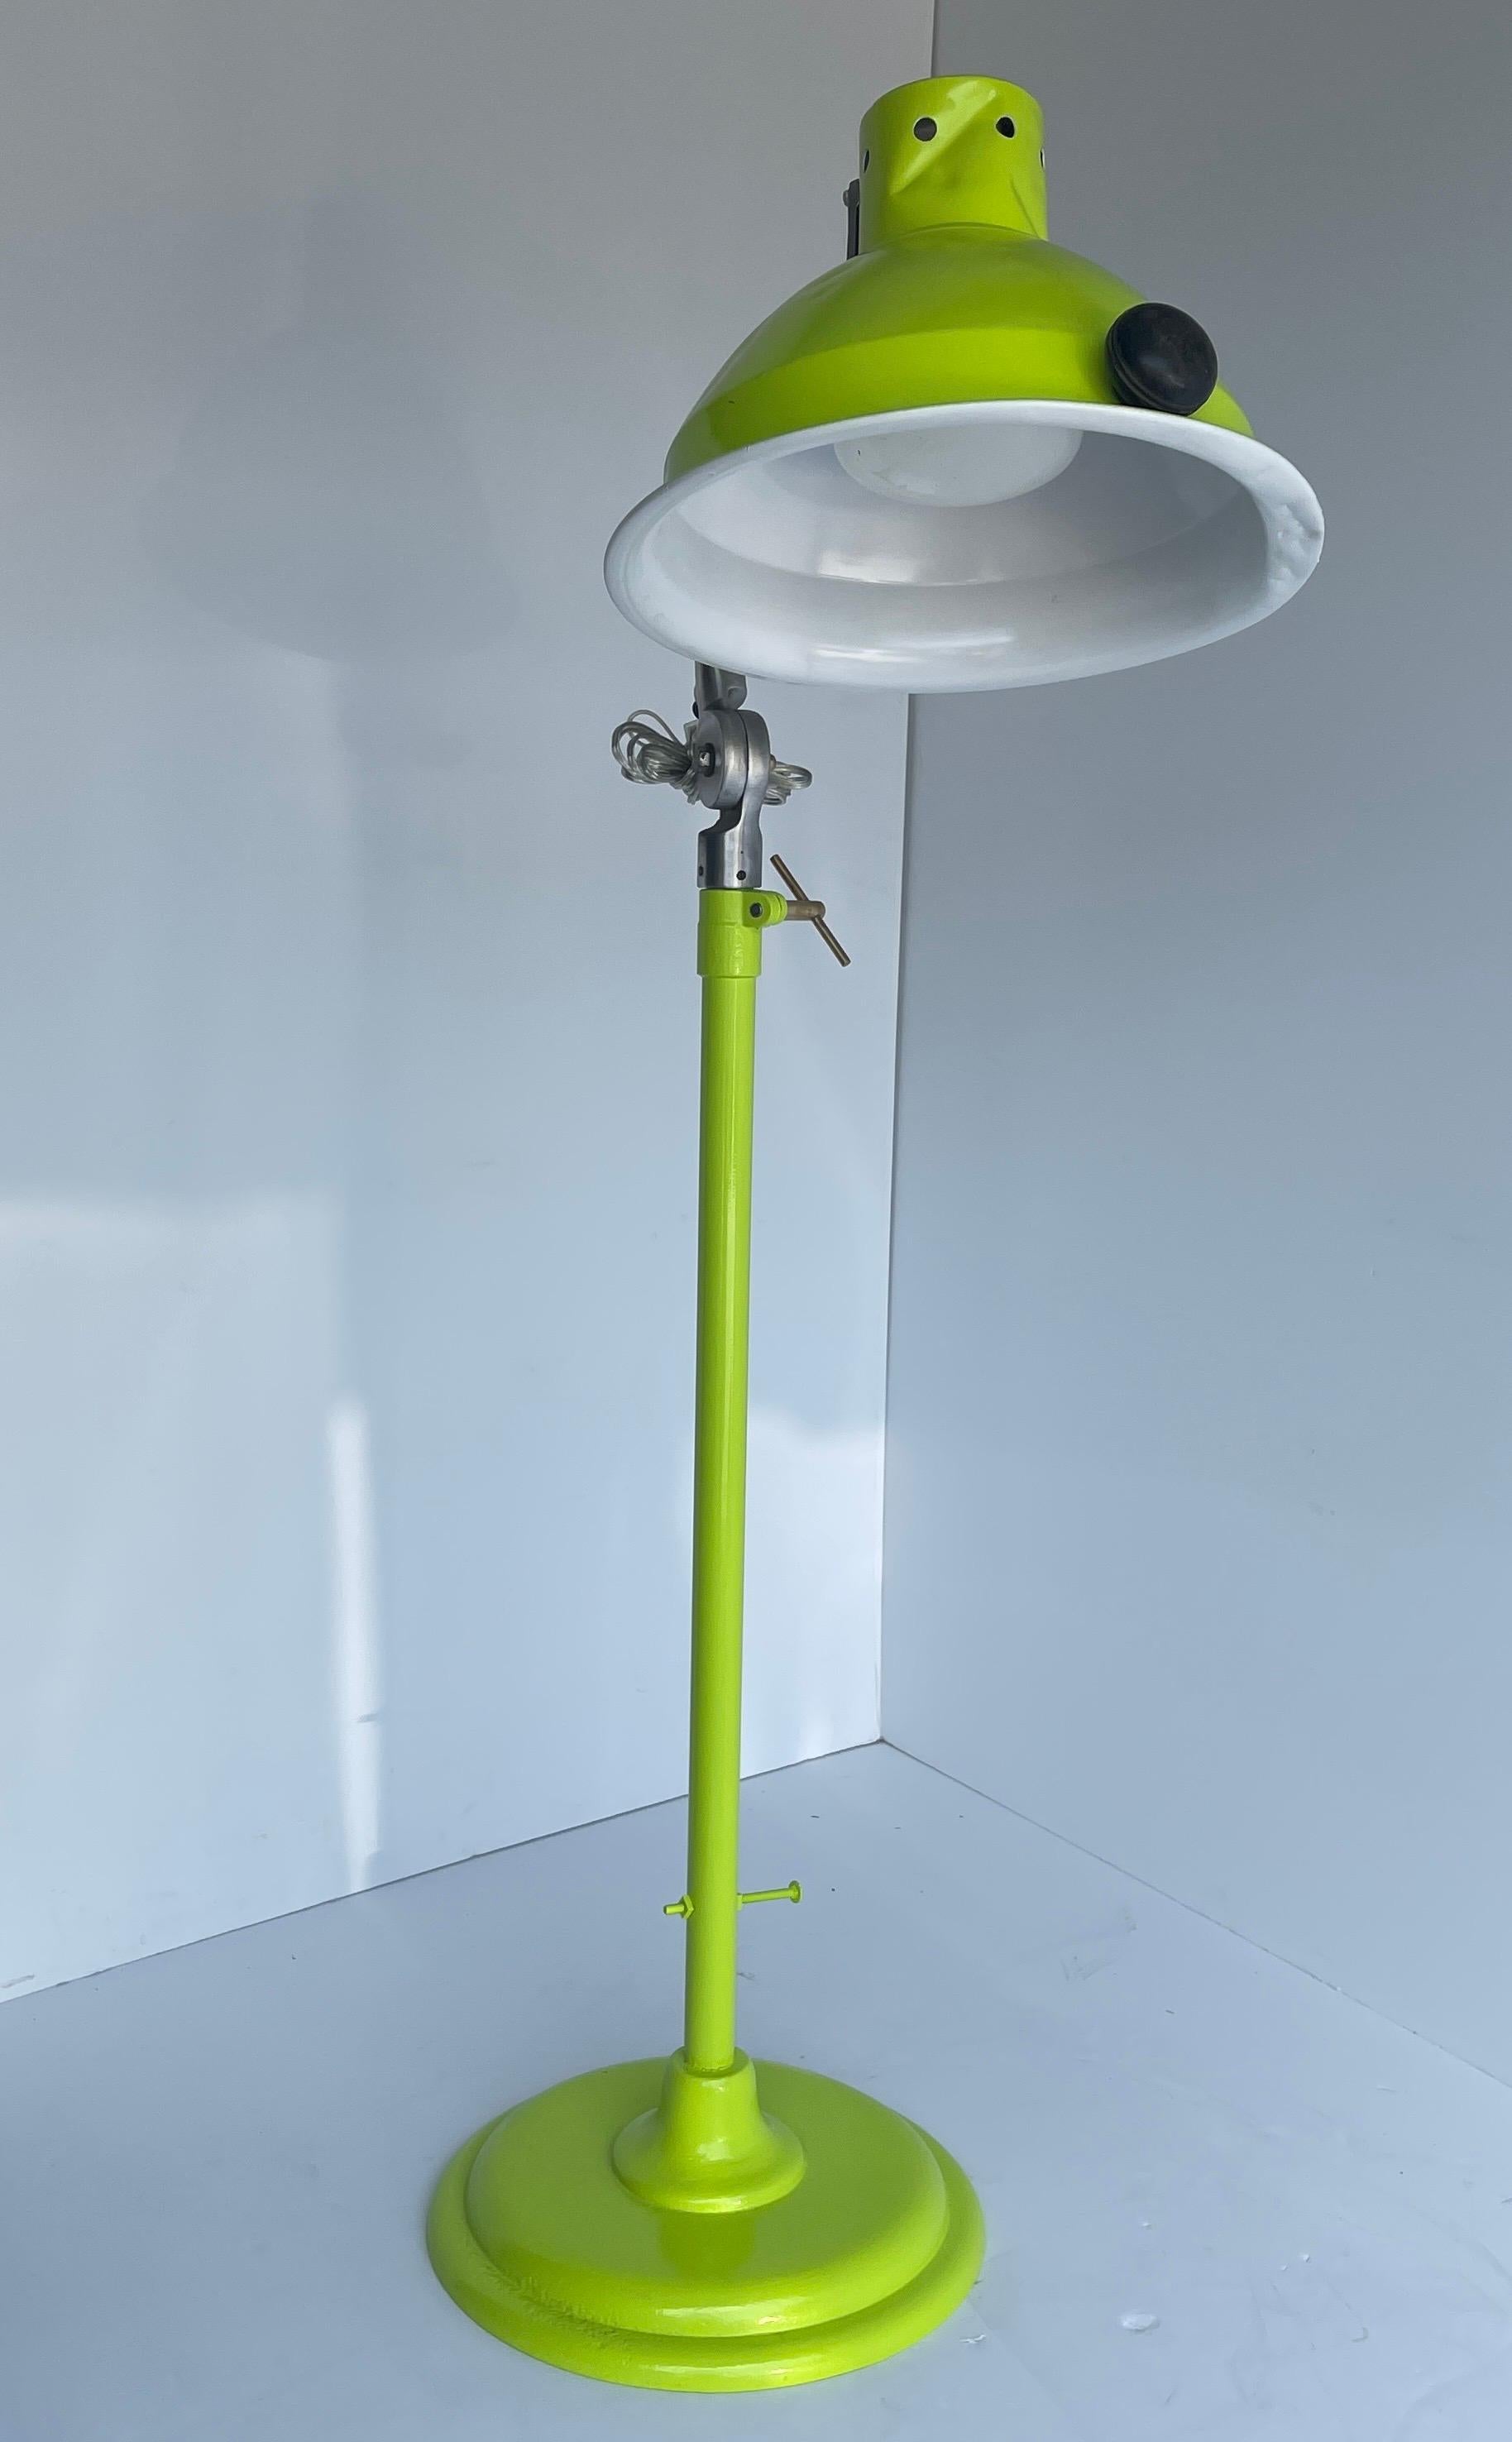 Adjustable Industrial iron floor lamp, powder coated in bright chartreuse, manufactured M. Brandt & Son Co.
This tall iron lamp now has a bright chartreuse and white painted surface. The floor lamp has a brass twist for adjusting shade and working